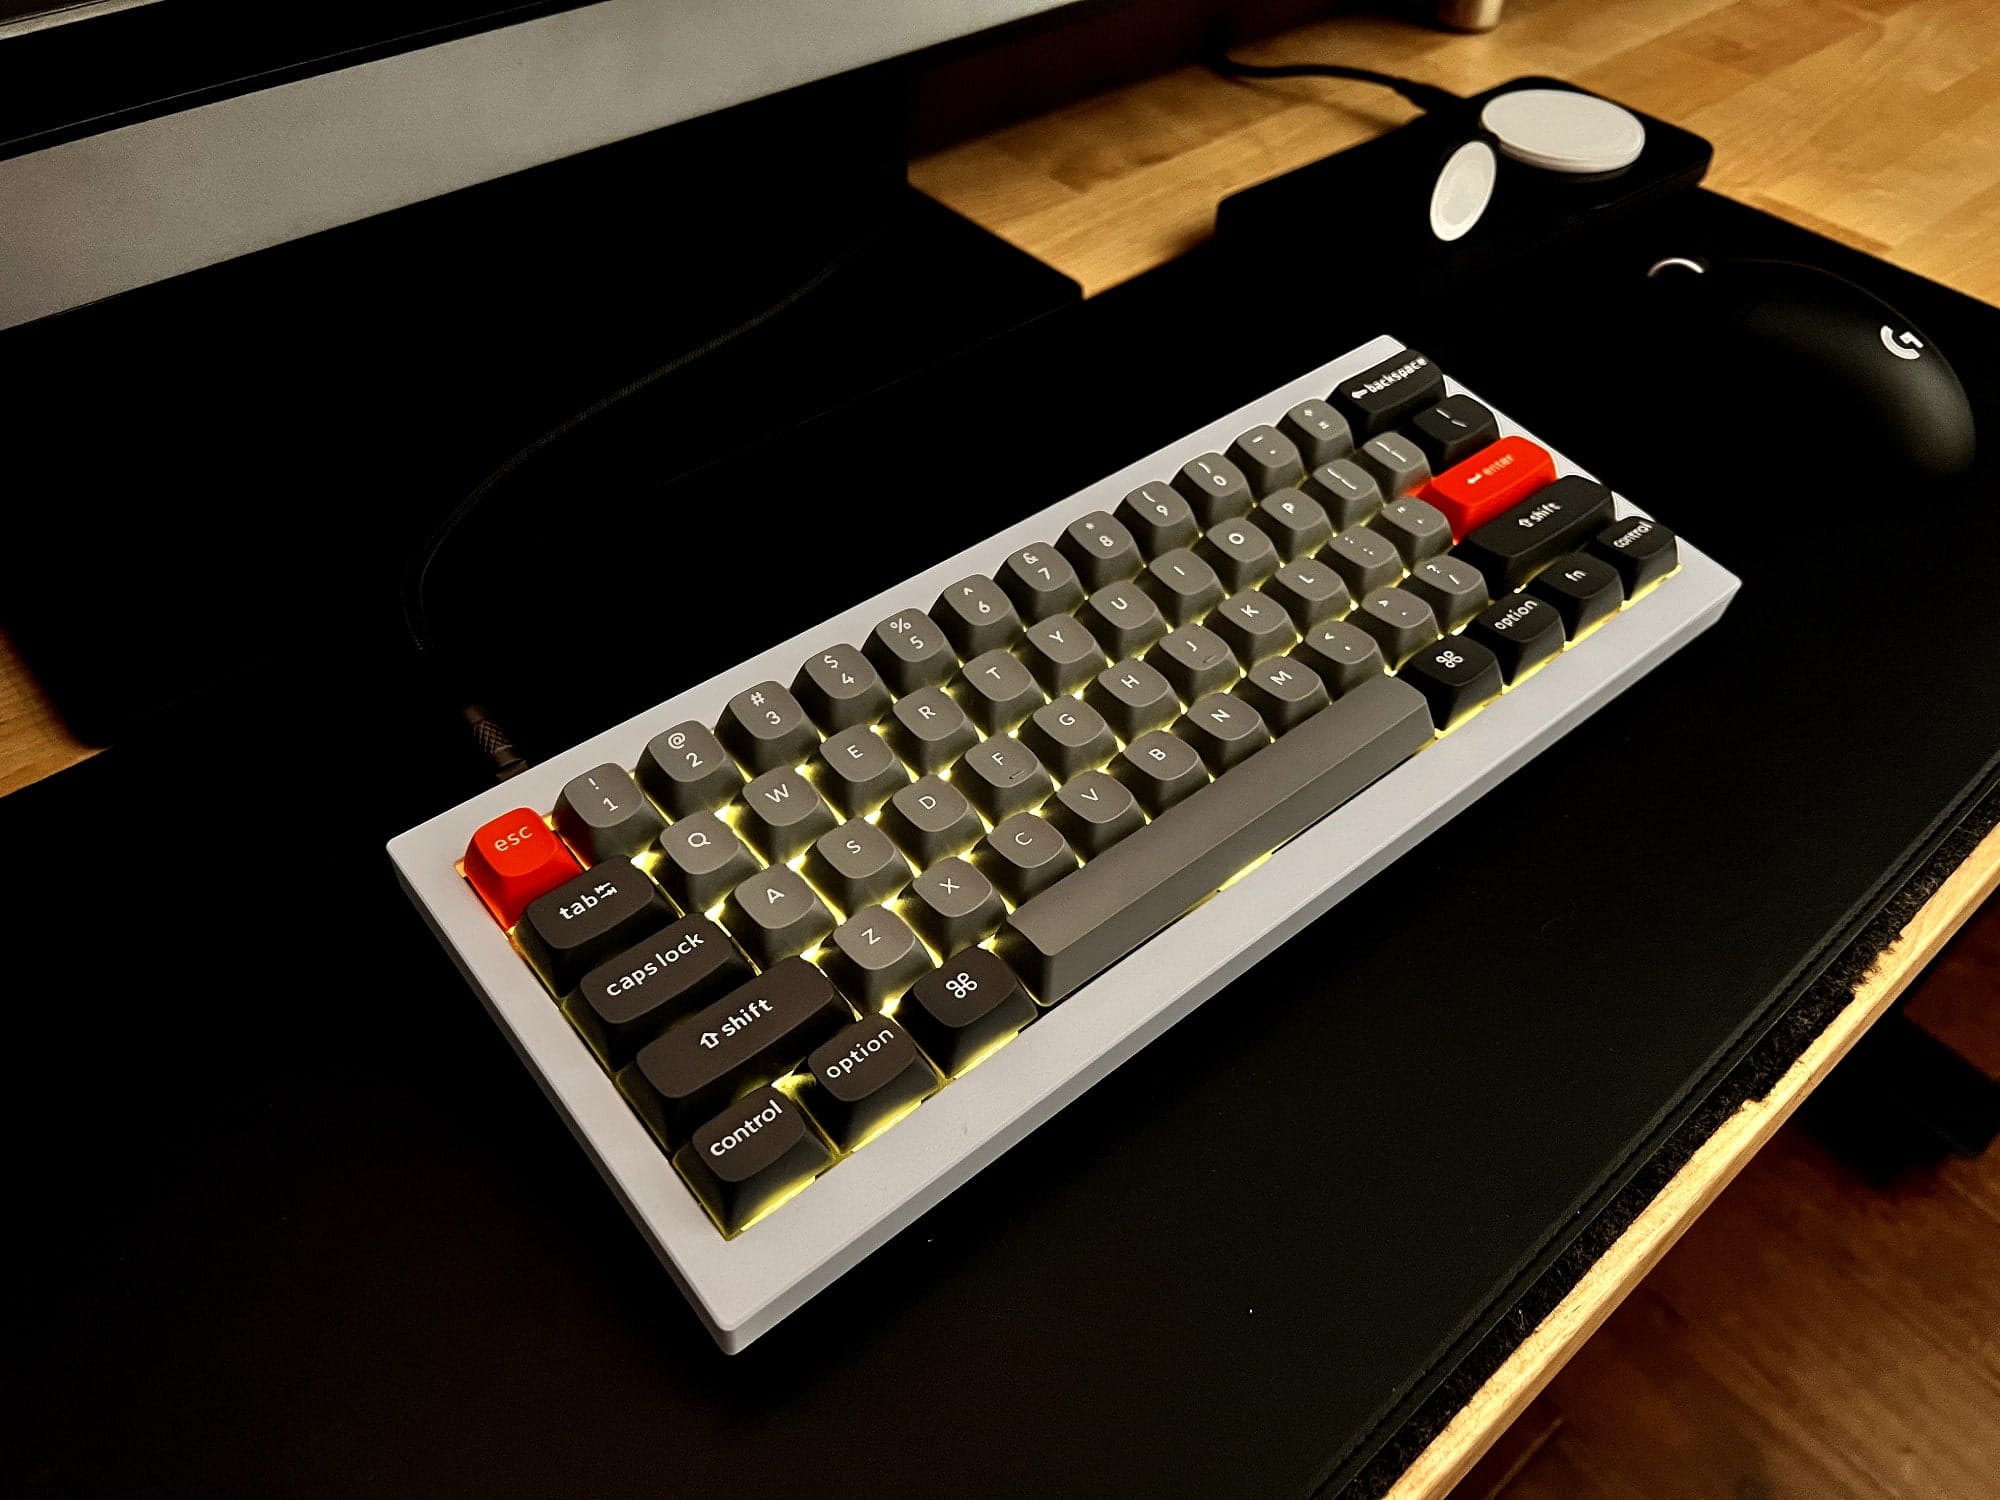 A close-up of a grey Keychron mechanical keyboard with custom keycaps, including an orange escape key and red return and shift keys, backlit with yellow LEDs, placed on a black desk mat next to a Logitech G Pro wireless gaming mouse